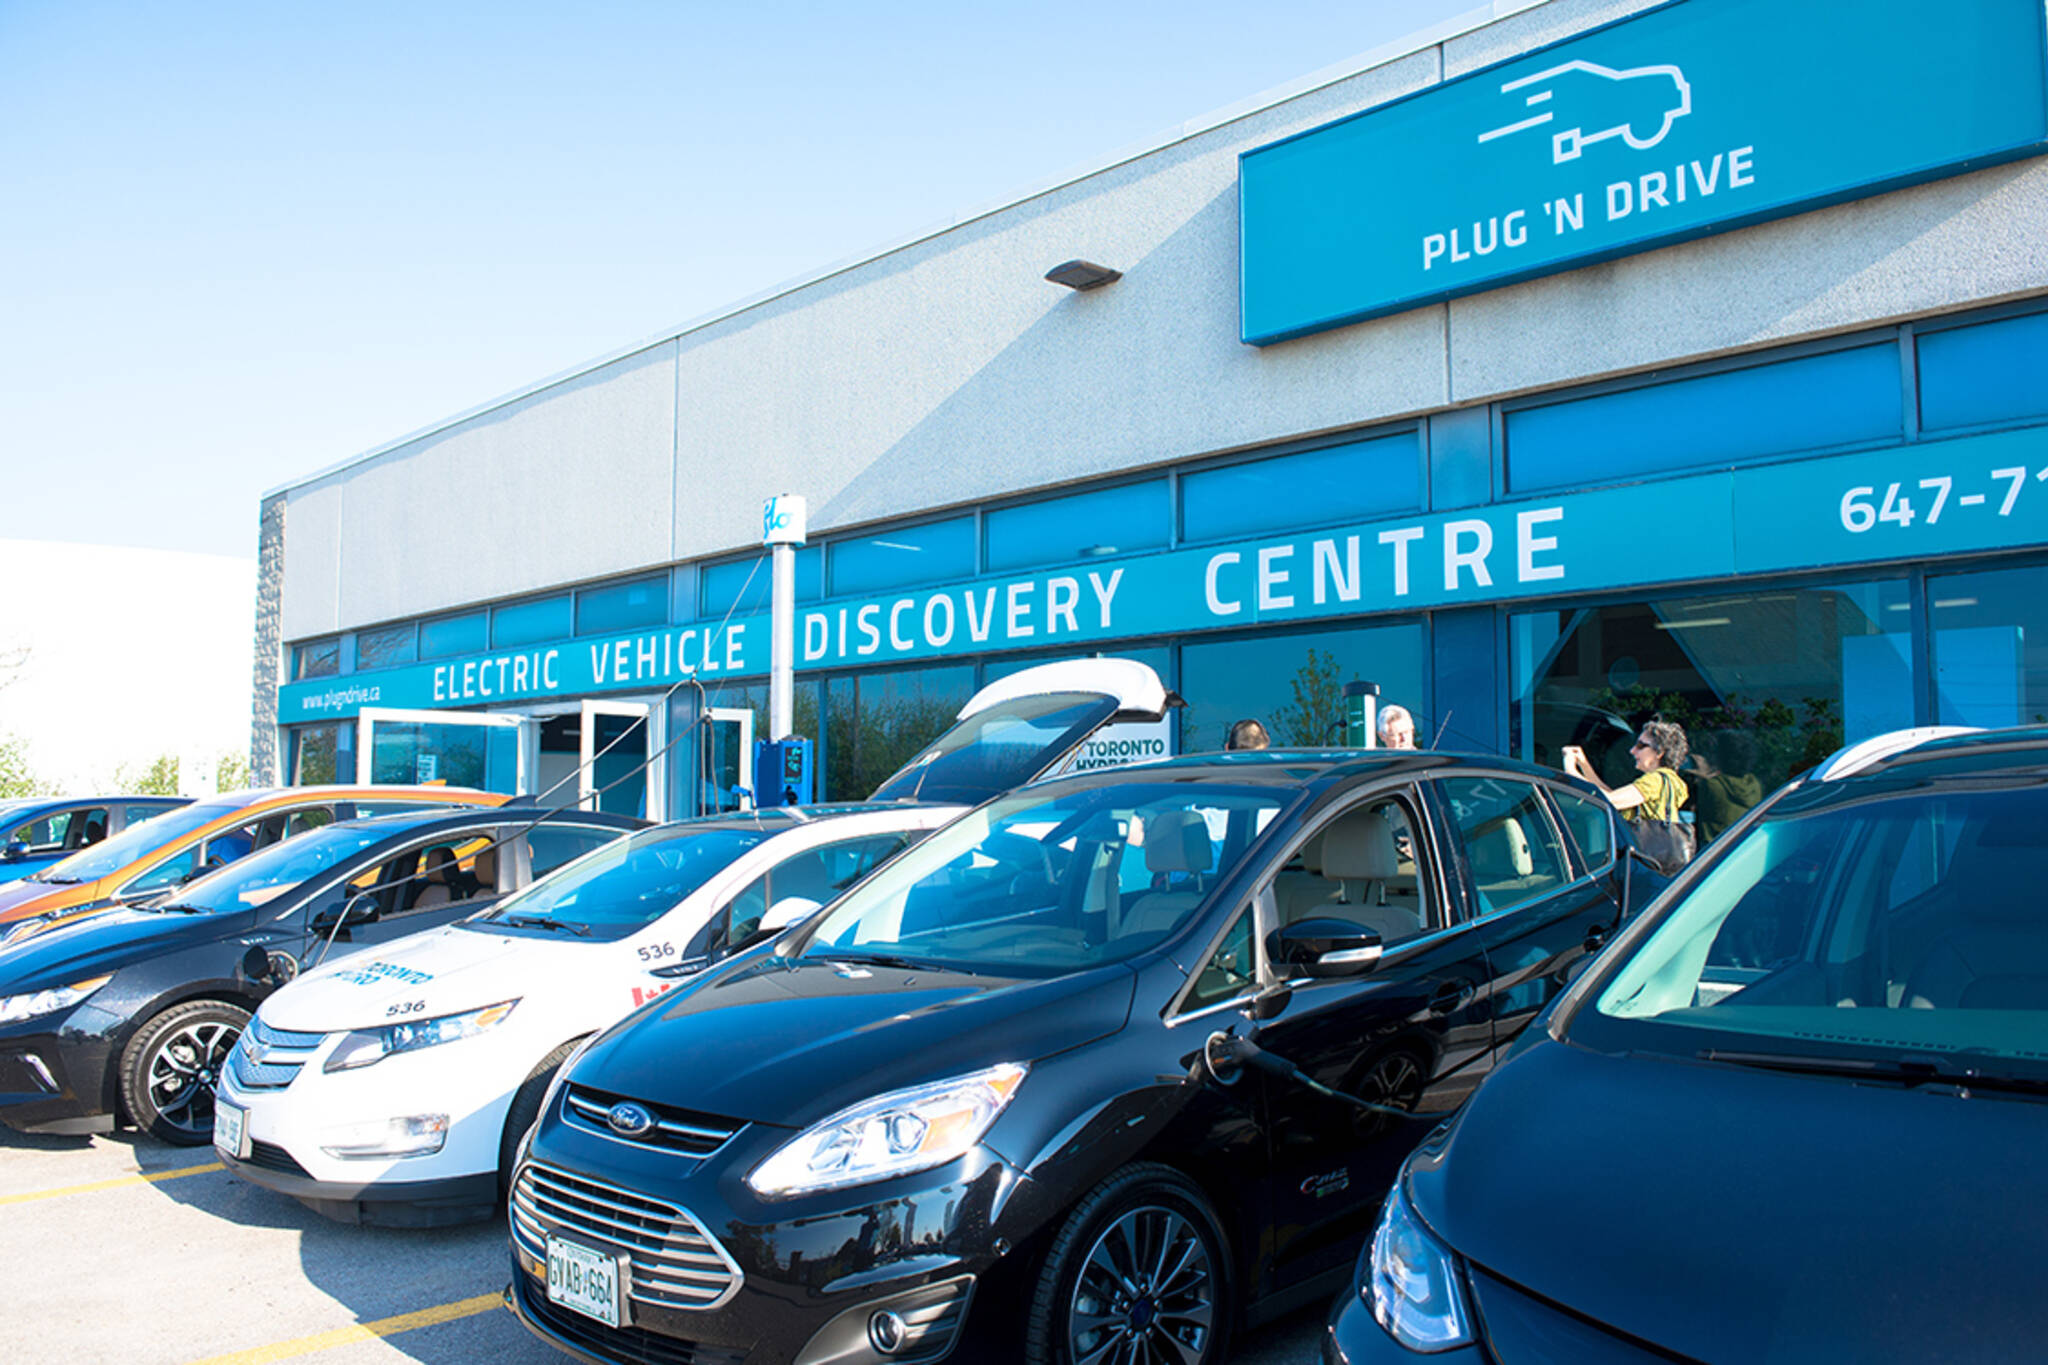 Electric vehicle discovery centre just opened in Toronto